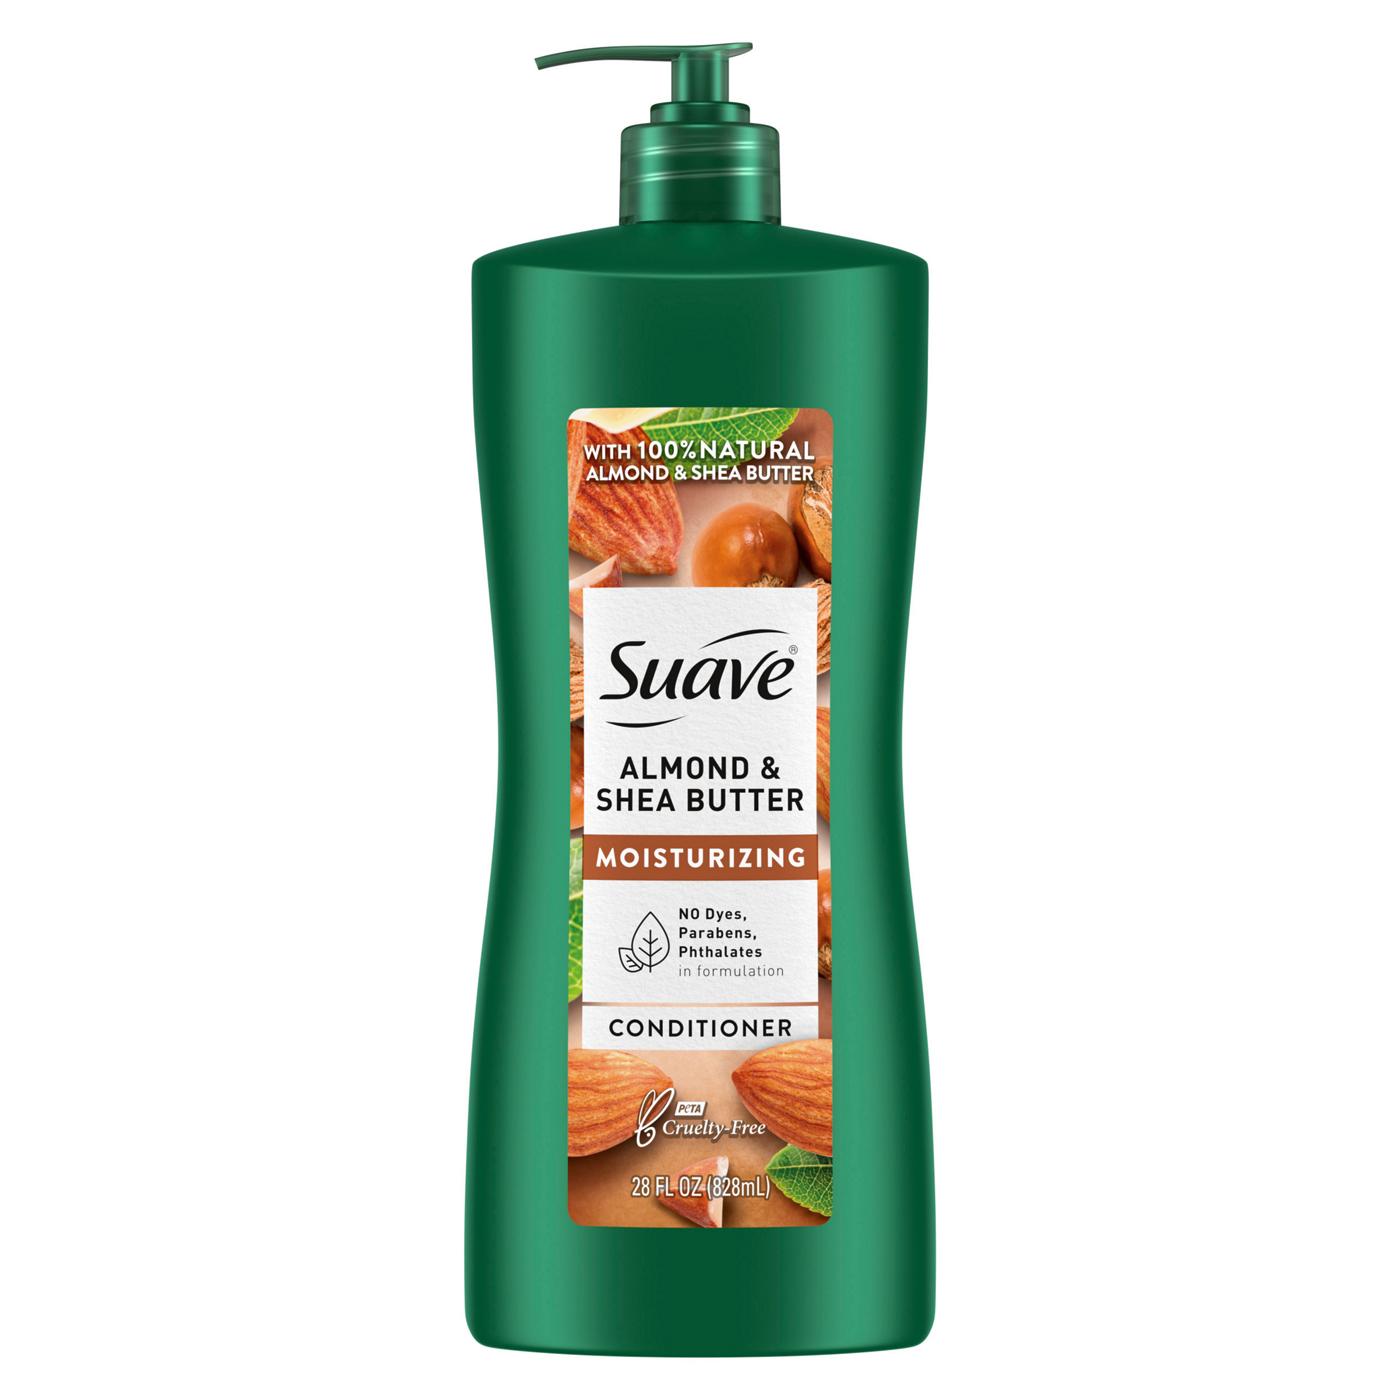 Suave Professionals Almond and Shea Butter Moisturizing Conditioner; image 1 of 10